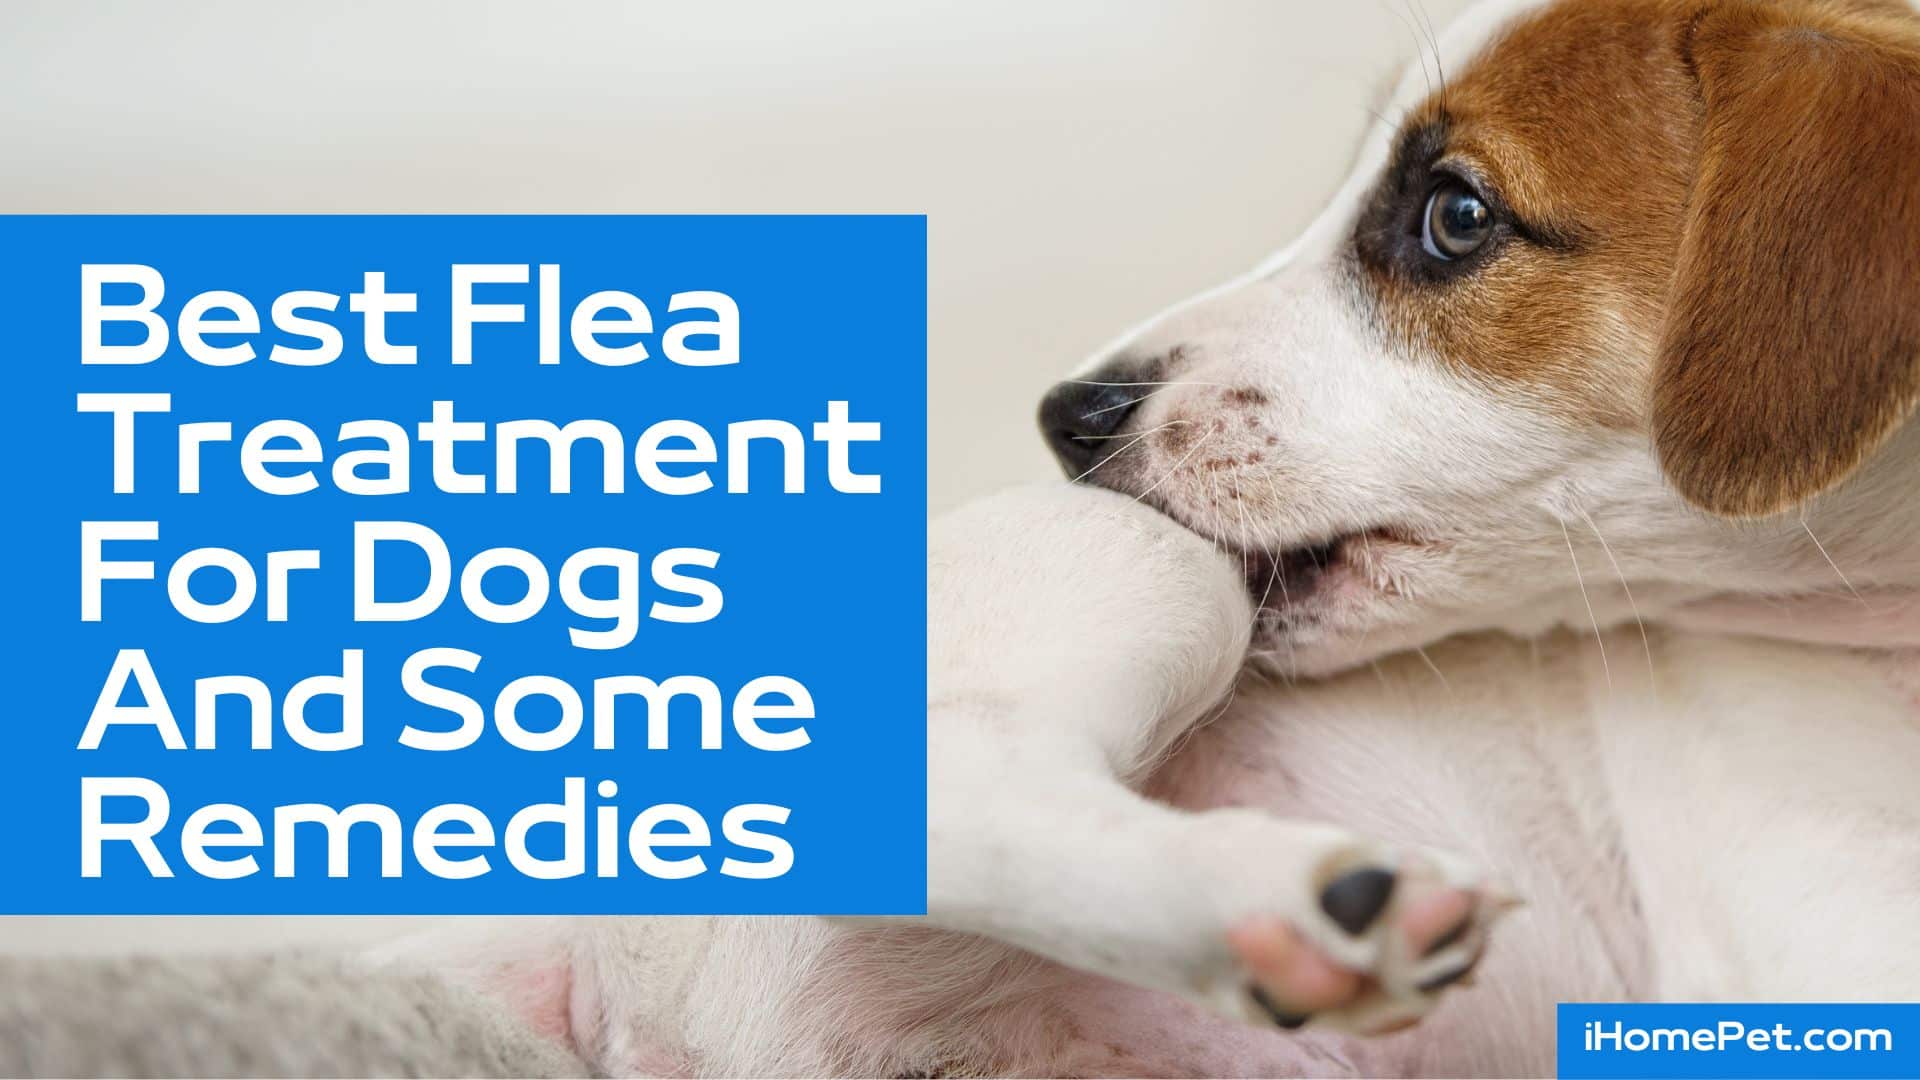 Flea and tick symptoms to know as a dog owner